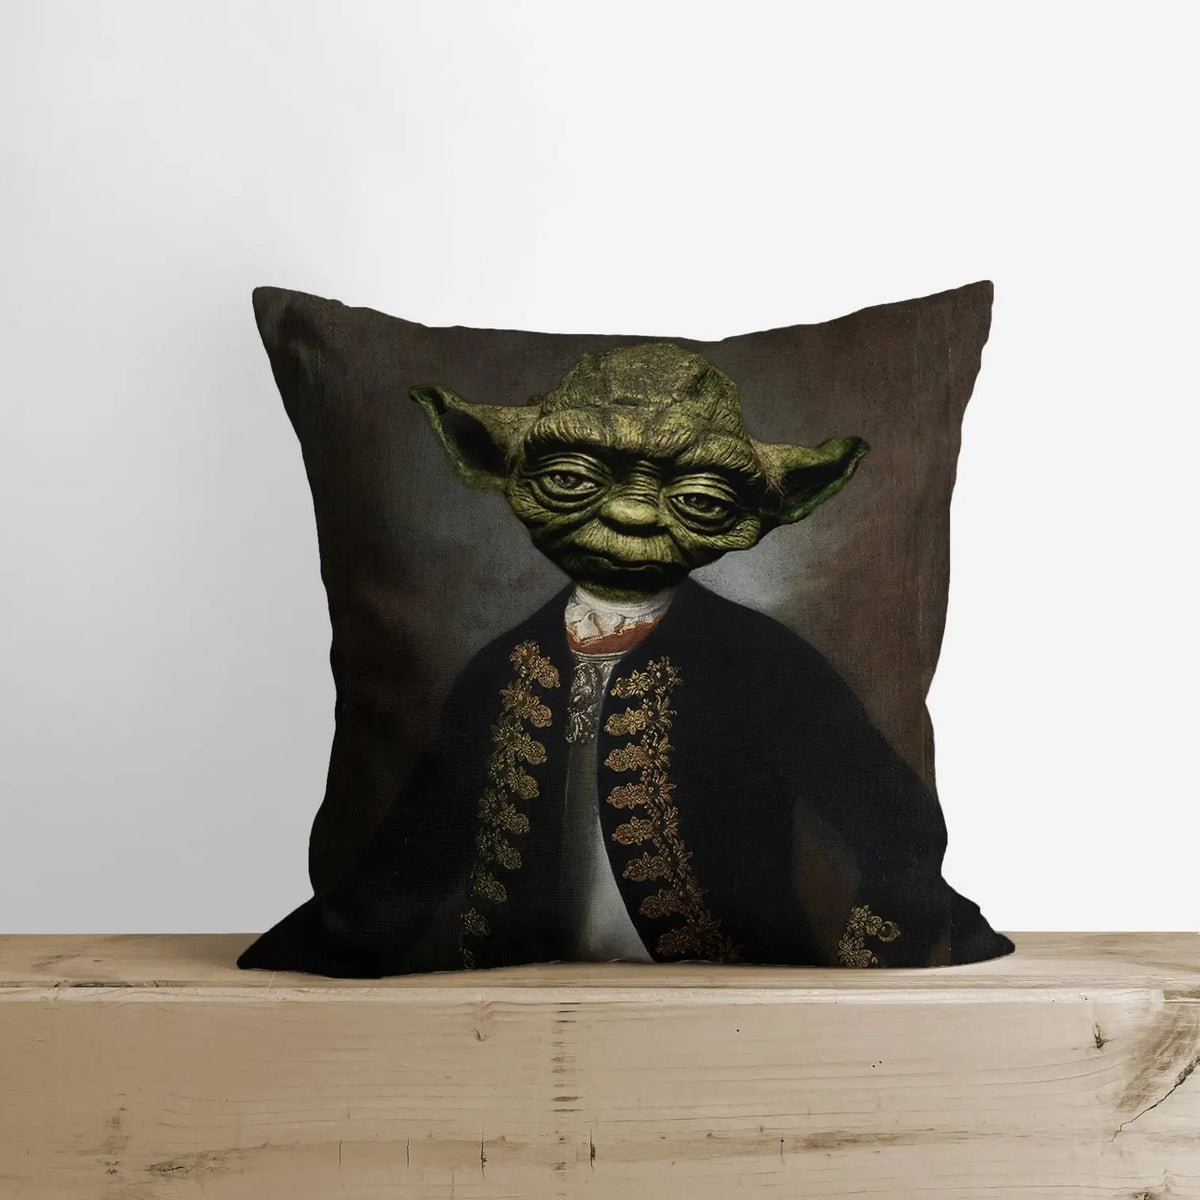 Hero | Star | Wars | Pillow Cover | Movie | Throw Pillow | Star Gifts | Fun  Gifts | Kids Room | Home Decor | Gift idea | Room Decor - UniikPillows